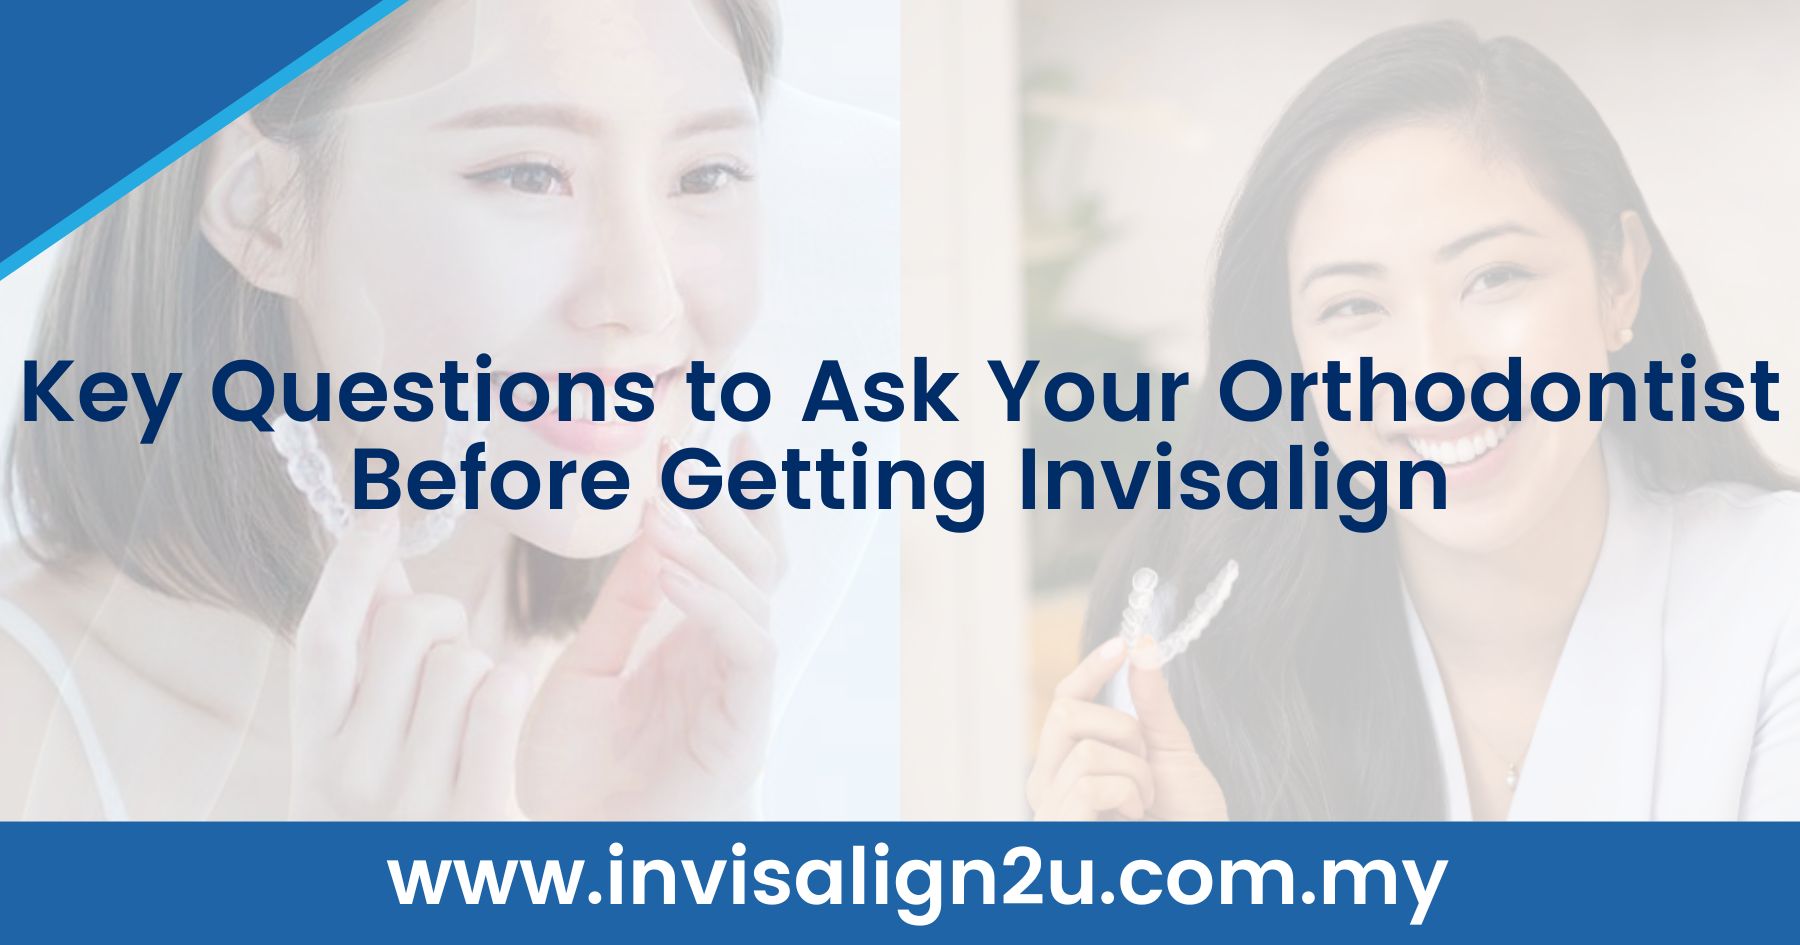 Key Questions to Ask Your Orthodontist Before Getting Invisalign